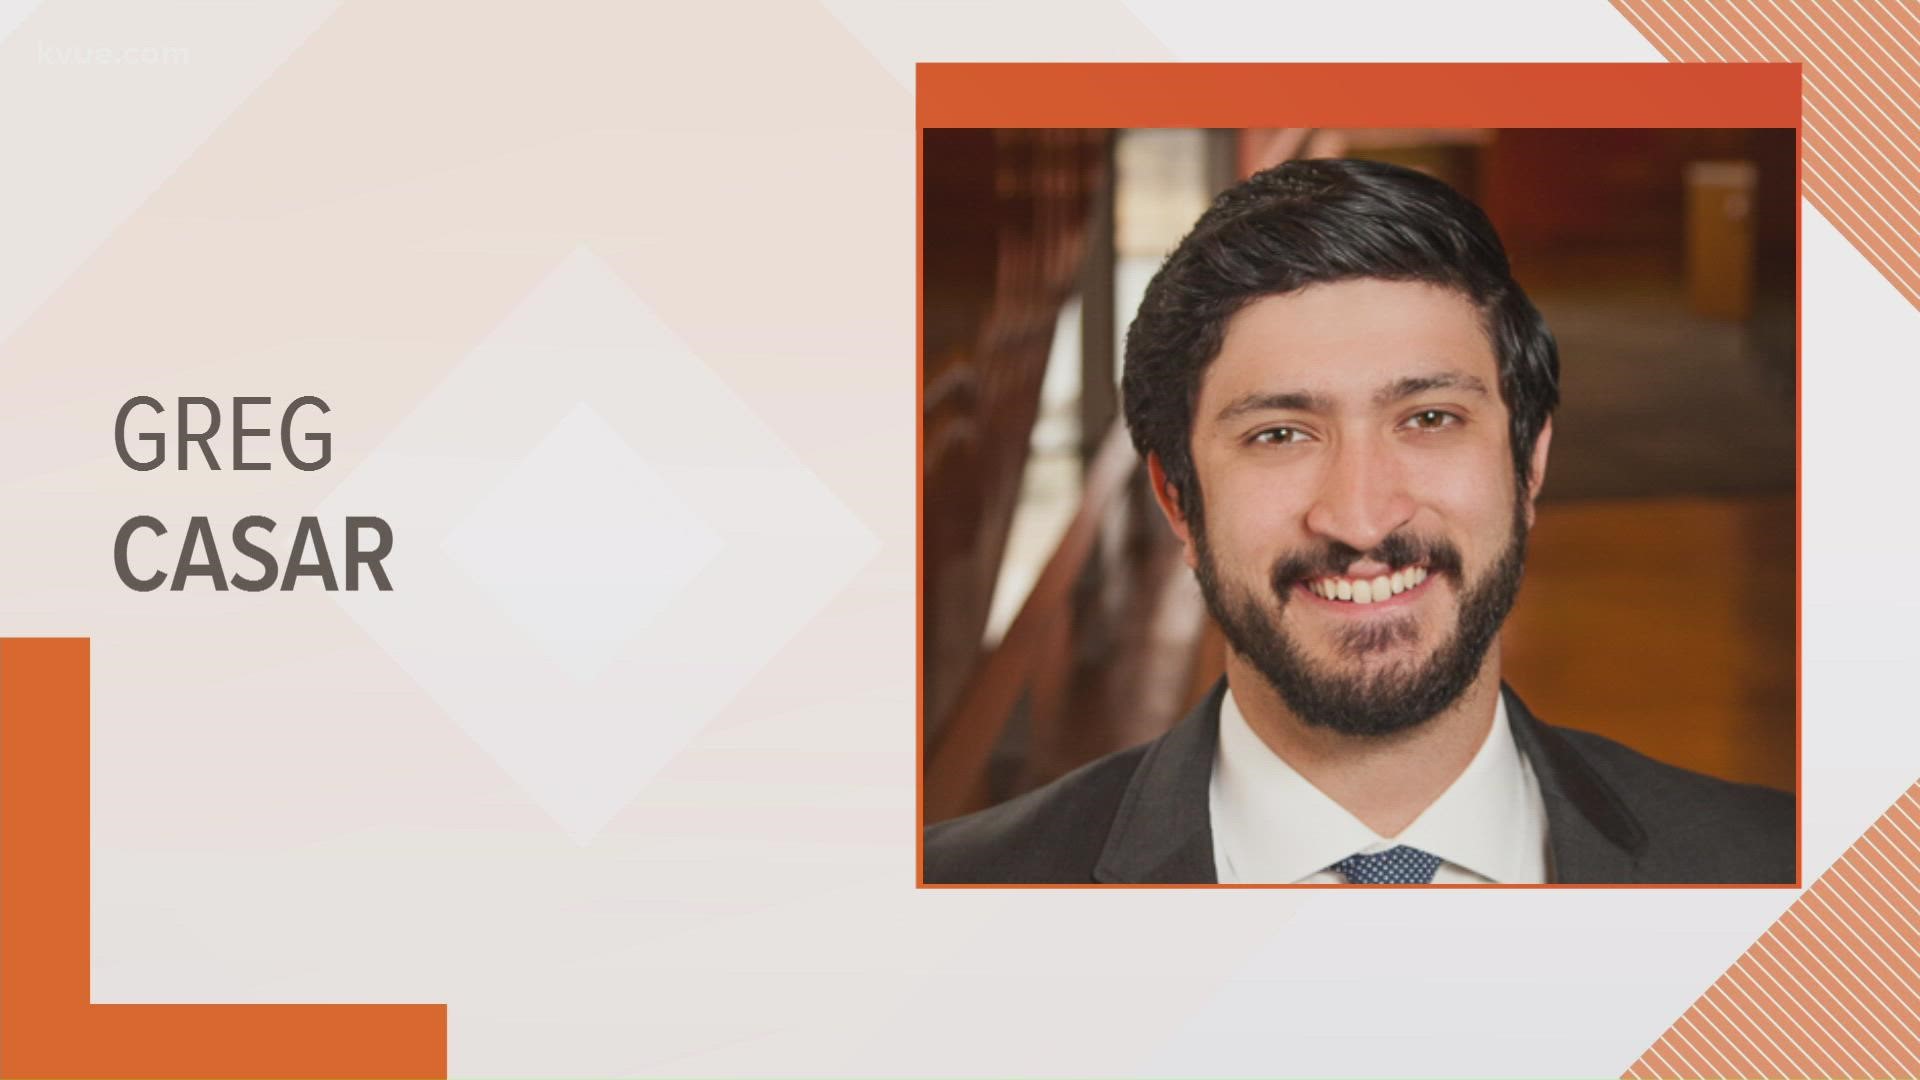 Austin City Council member Greg Casar has formed an exploratory committee to look into a possible run for Congress.